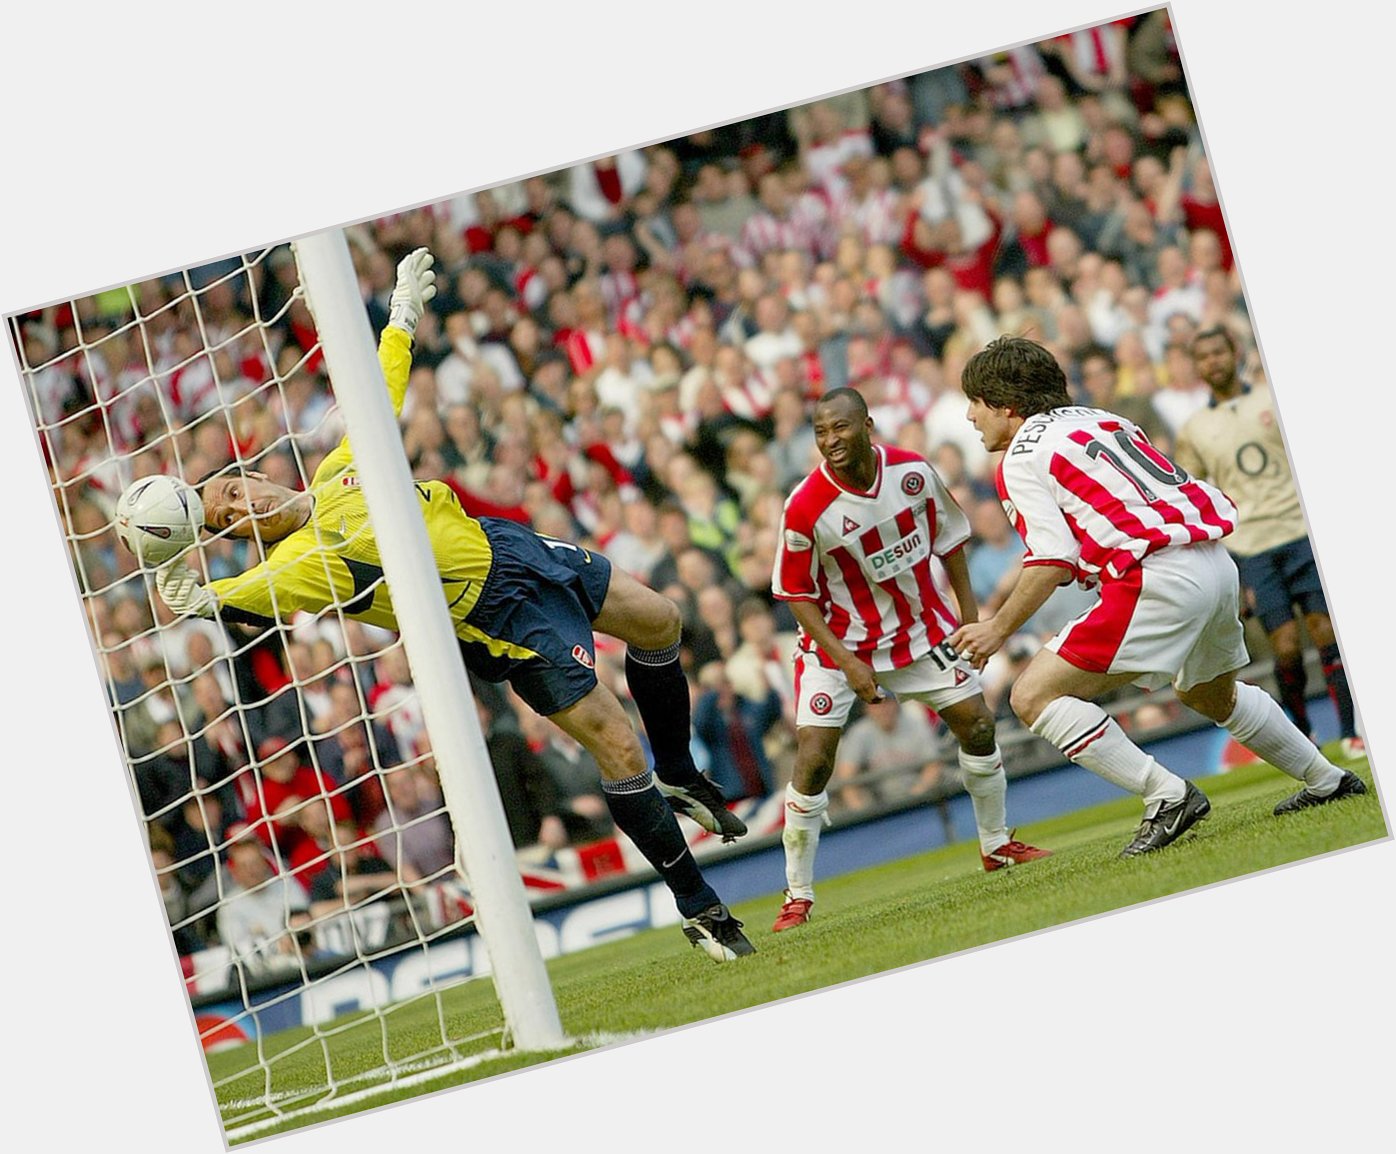 Happy Birthday David Seaman.

Will never forget his claw save to deny Peschisolido in the FA Cup. 